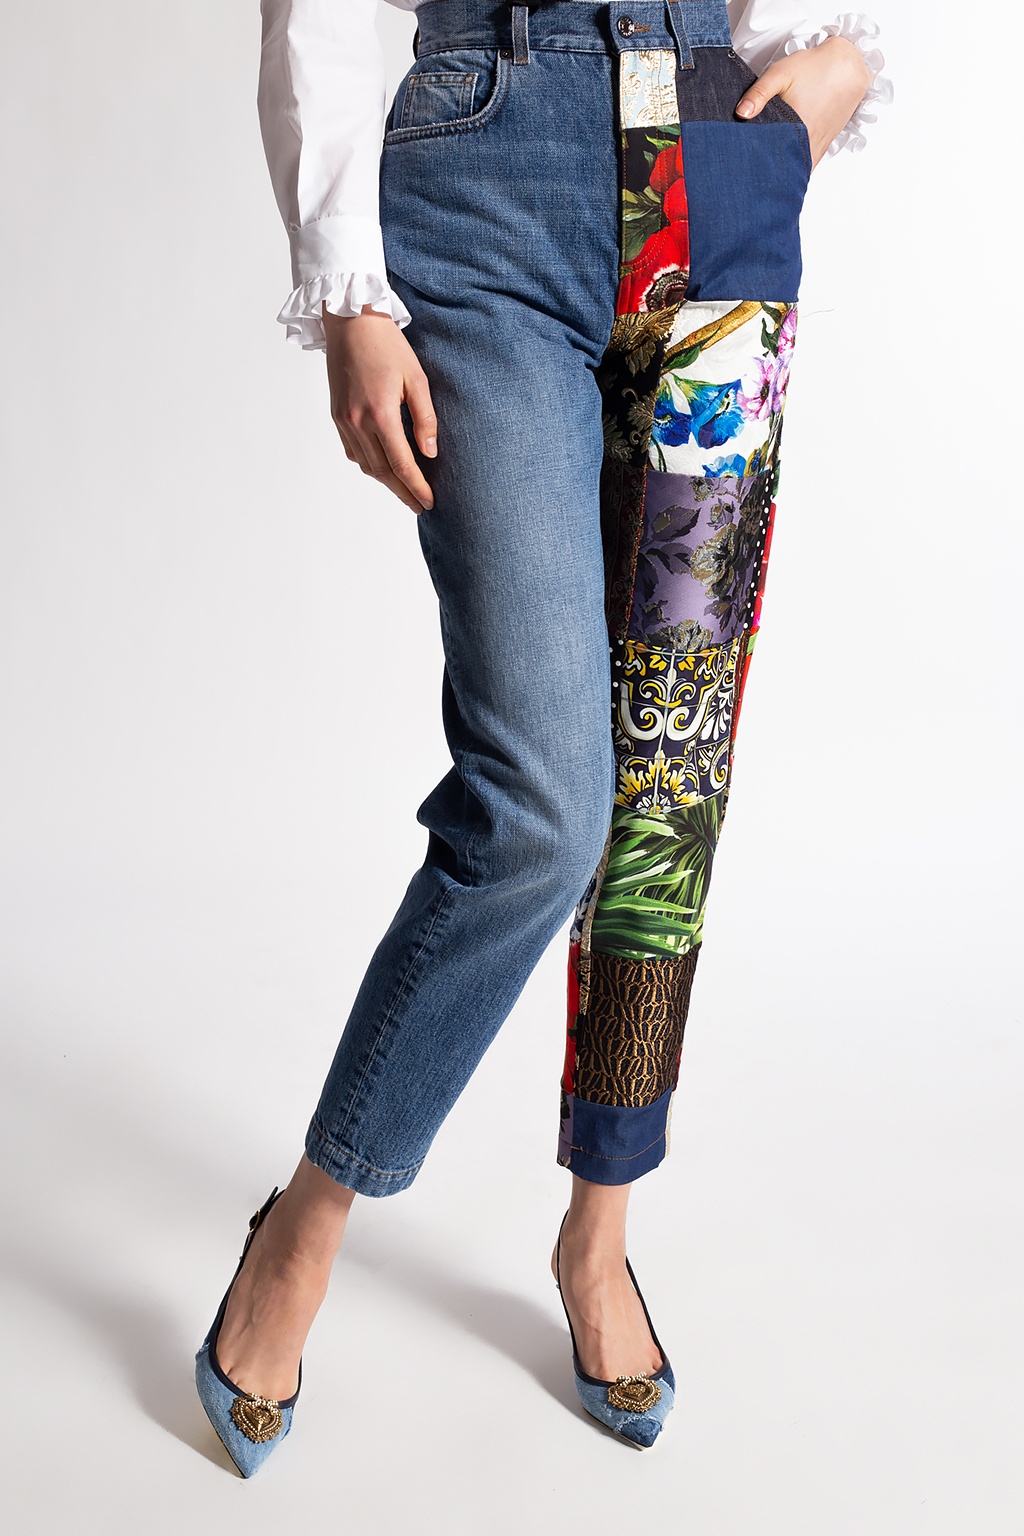 Blue Embroidered jeans Dolce & Gabbana - Vitkac Italy